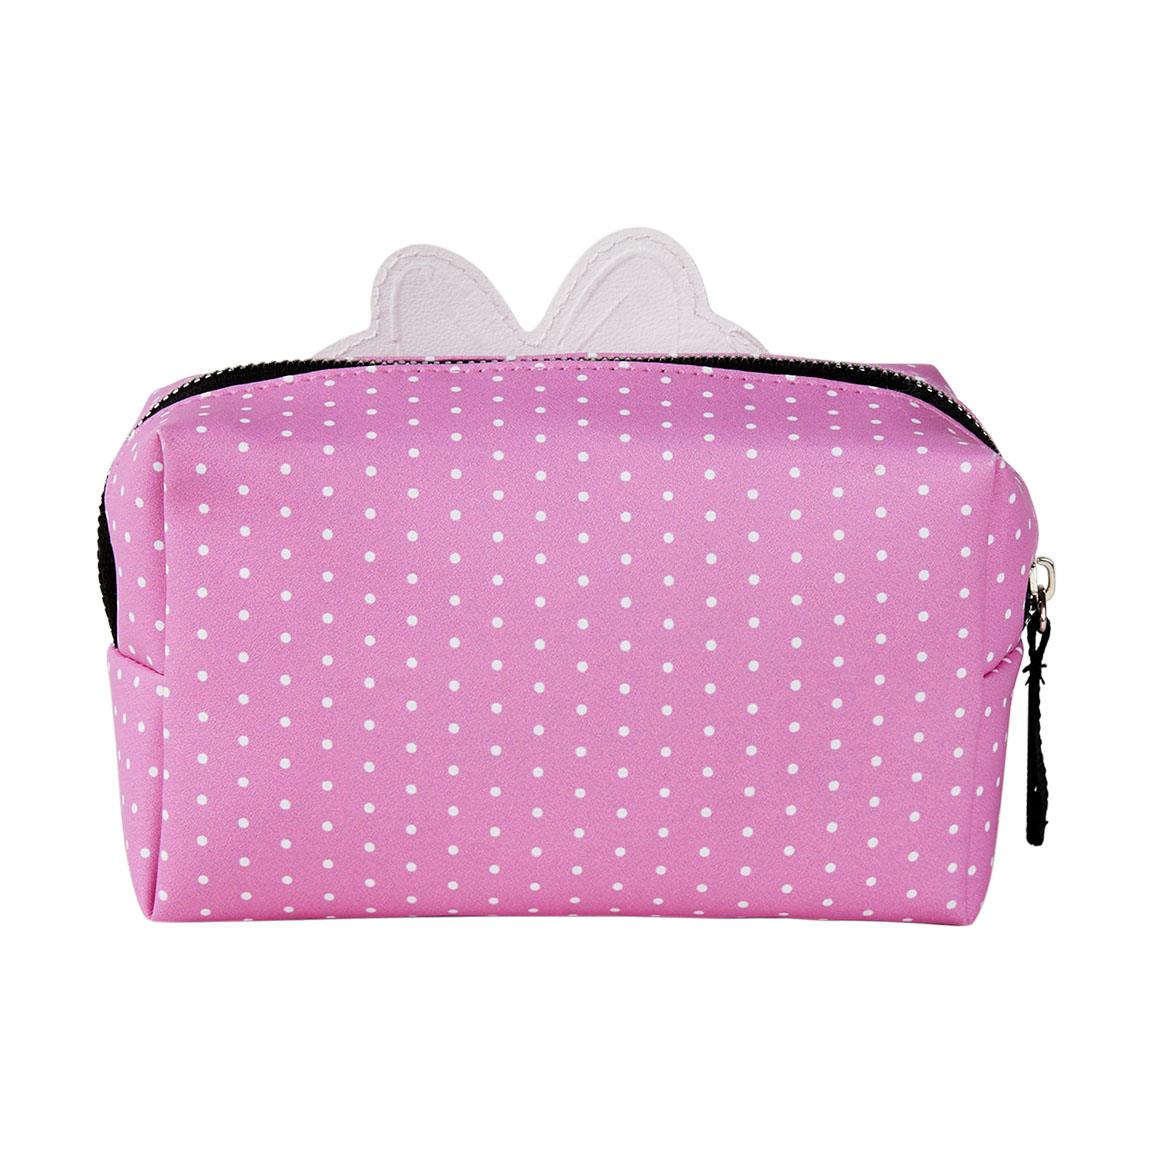 Neceser Minnie Mouse 76252